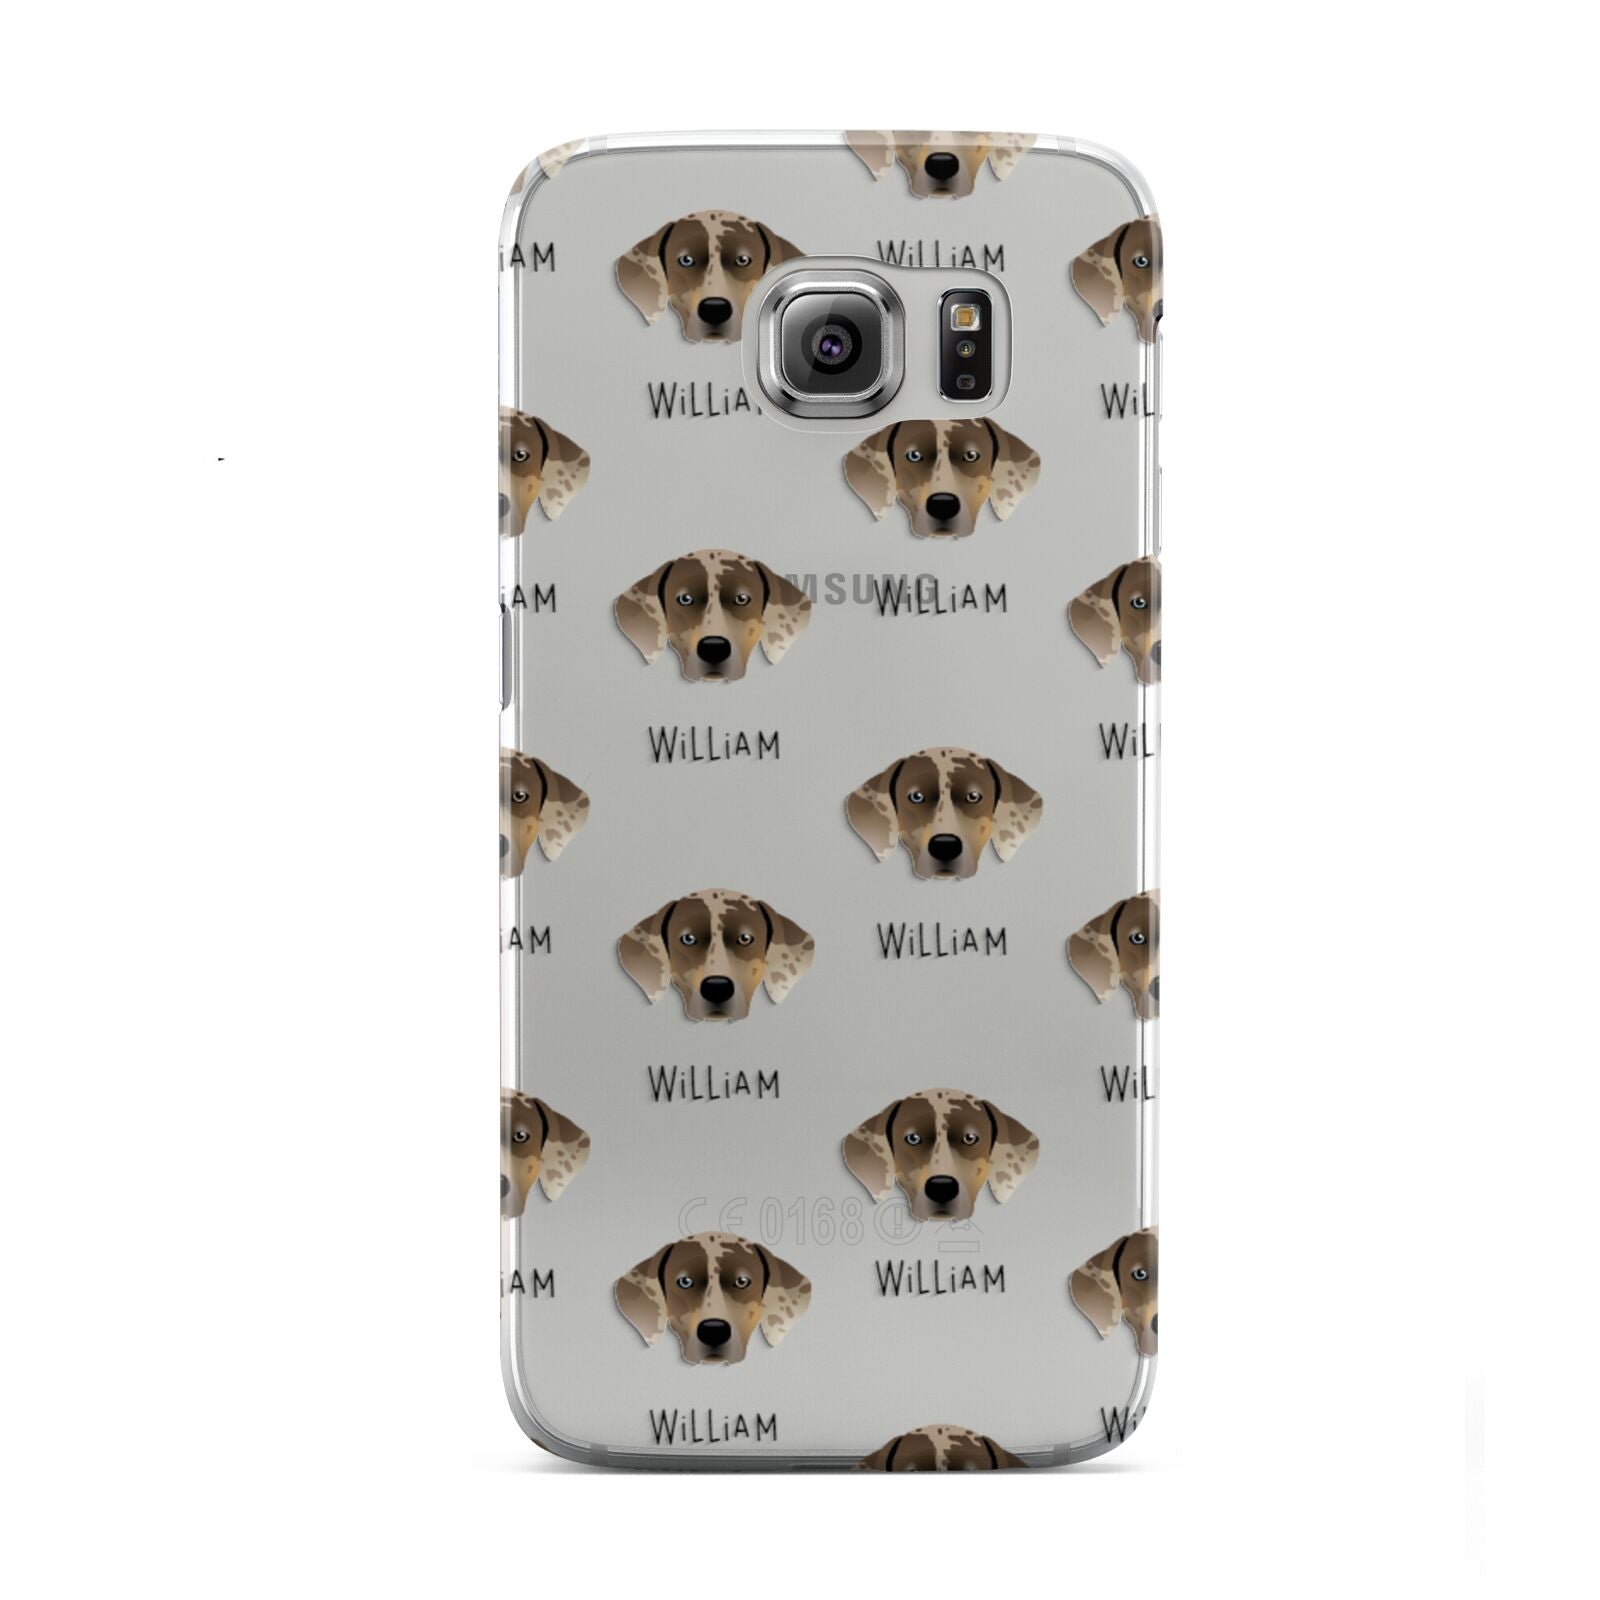 Catahoula Leopard Dog Icon with Name Samsung Galaxy S6 Case